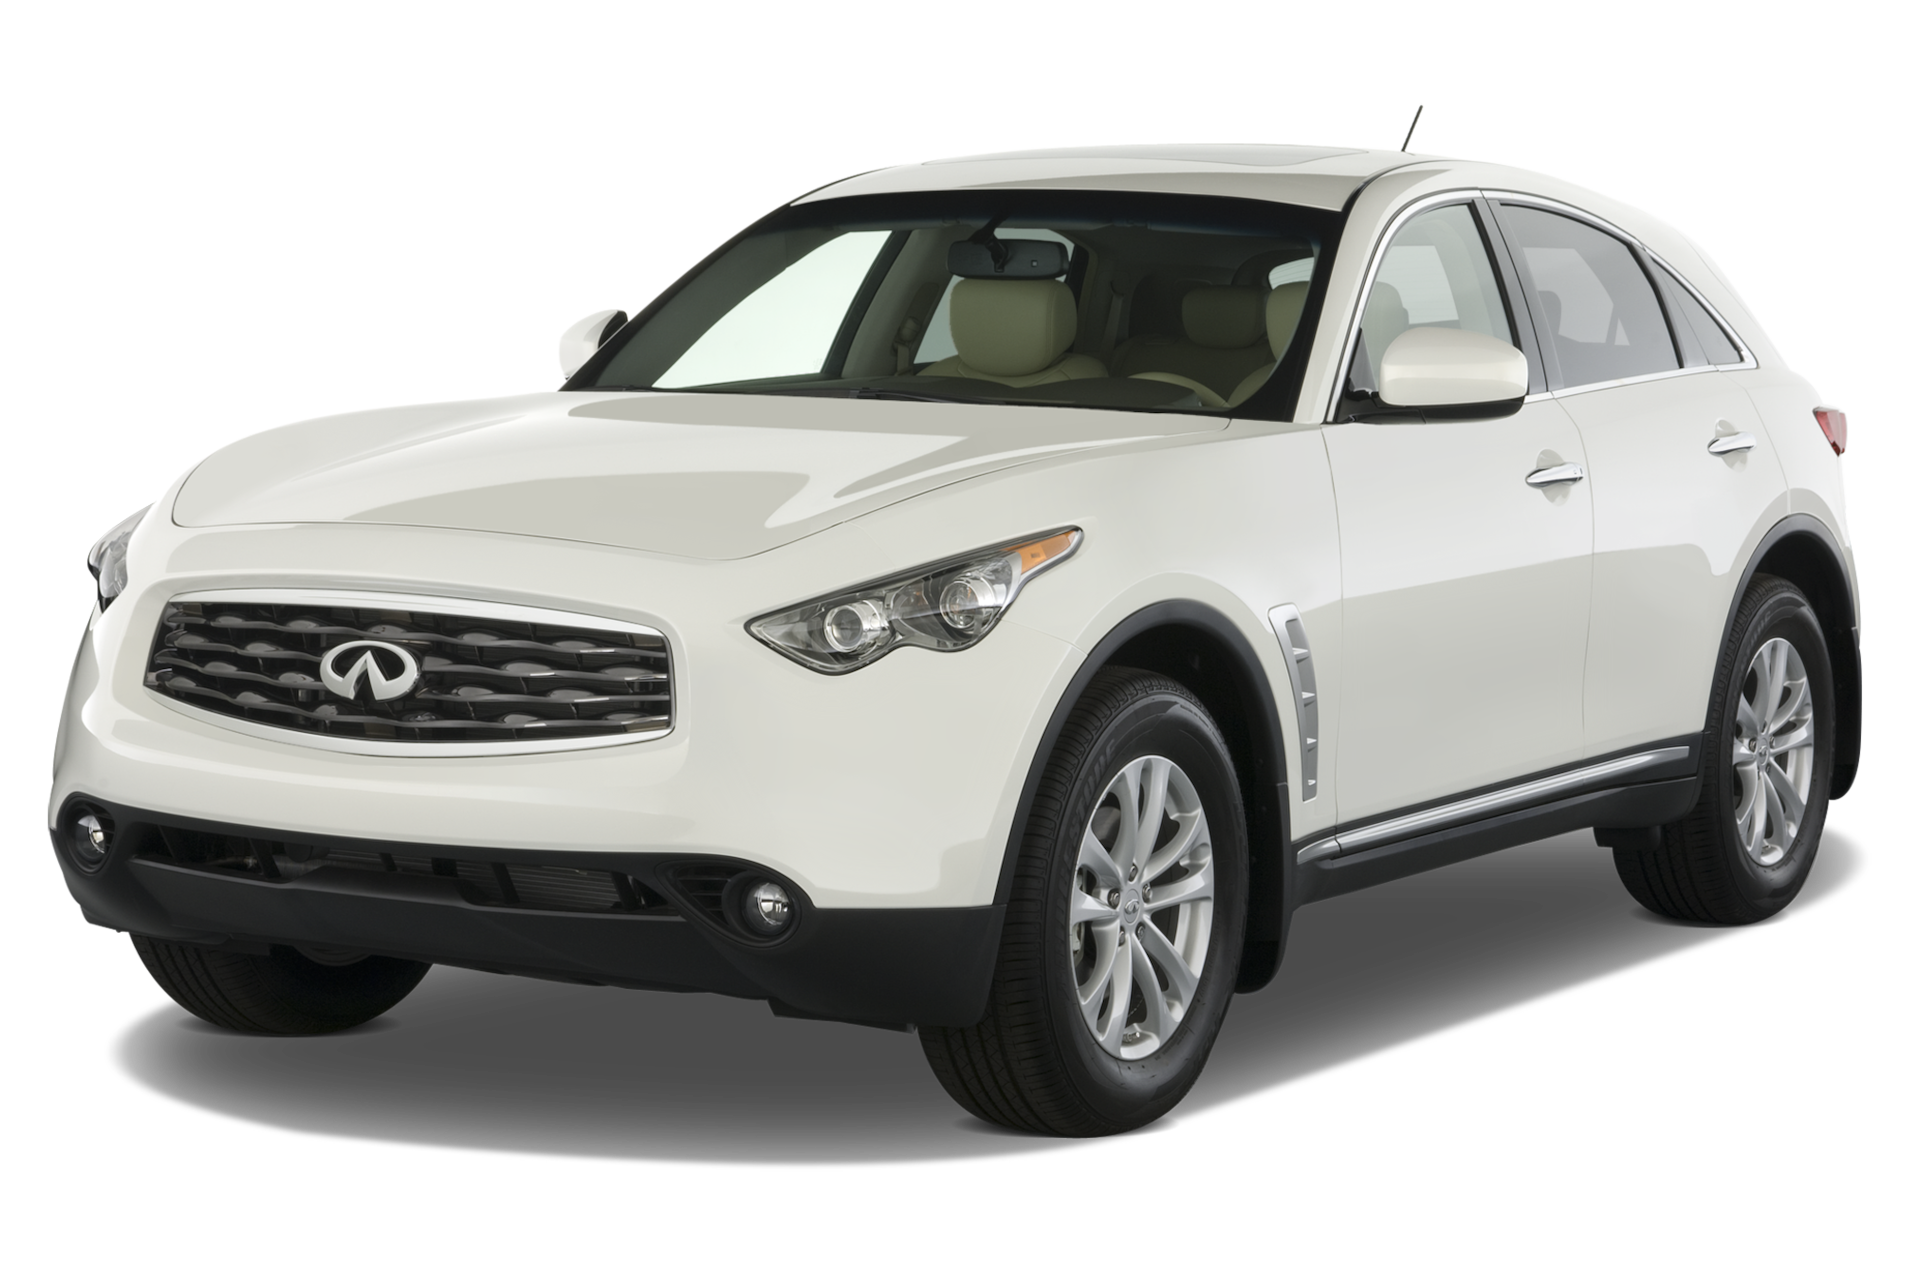 2010 Infiniti FX35 Prices, Reviews, and Photos - MotorTrend